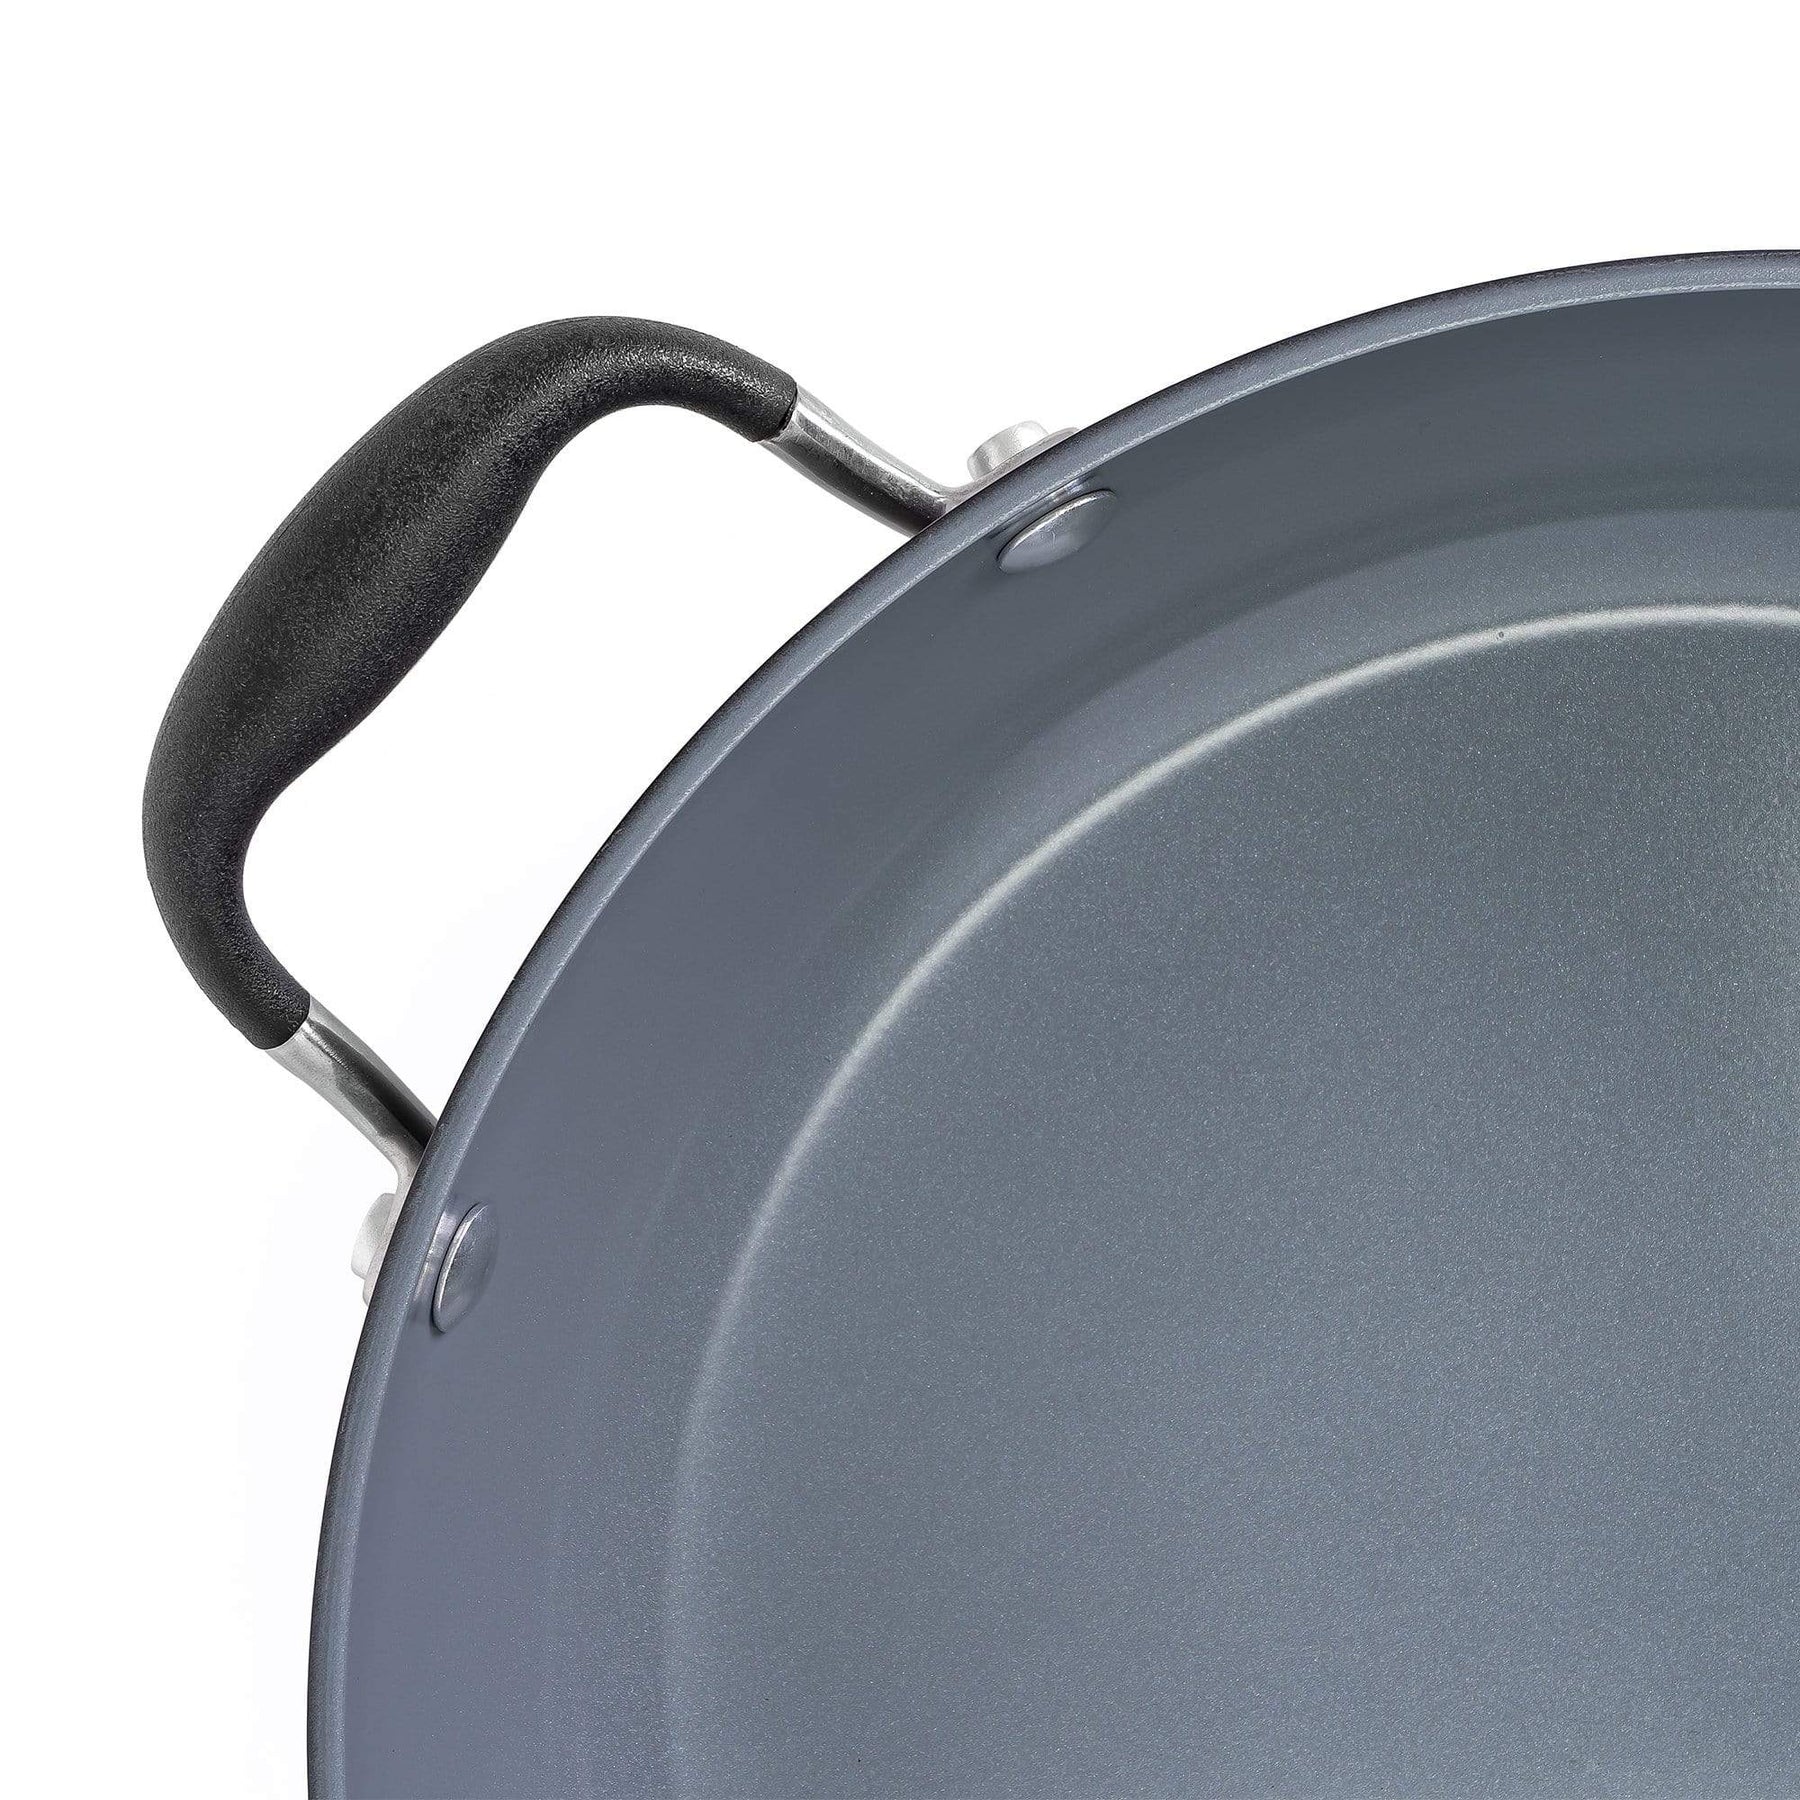 This Non-Stick Frying Pan 'Cleans Up Beautifully,' and It's on Sale